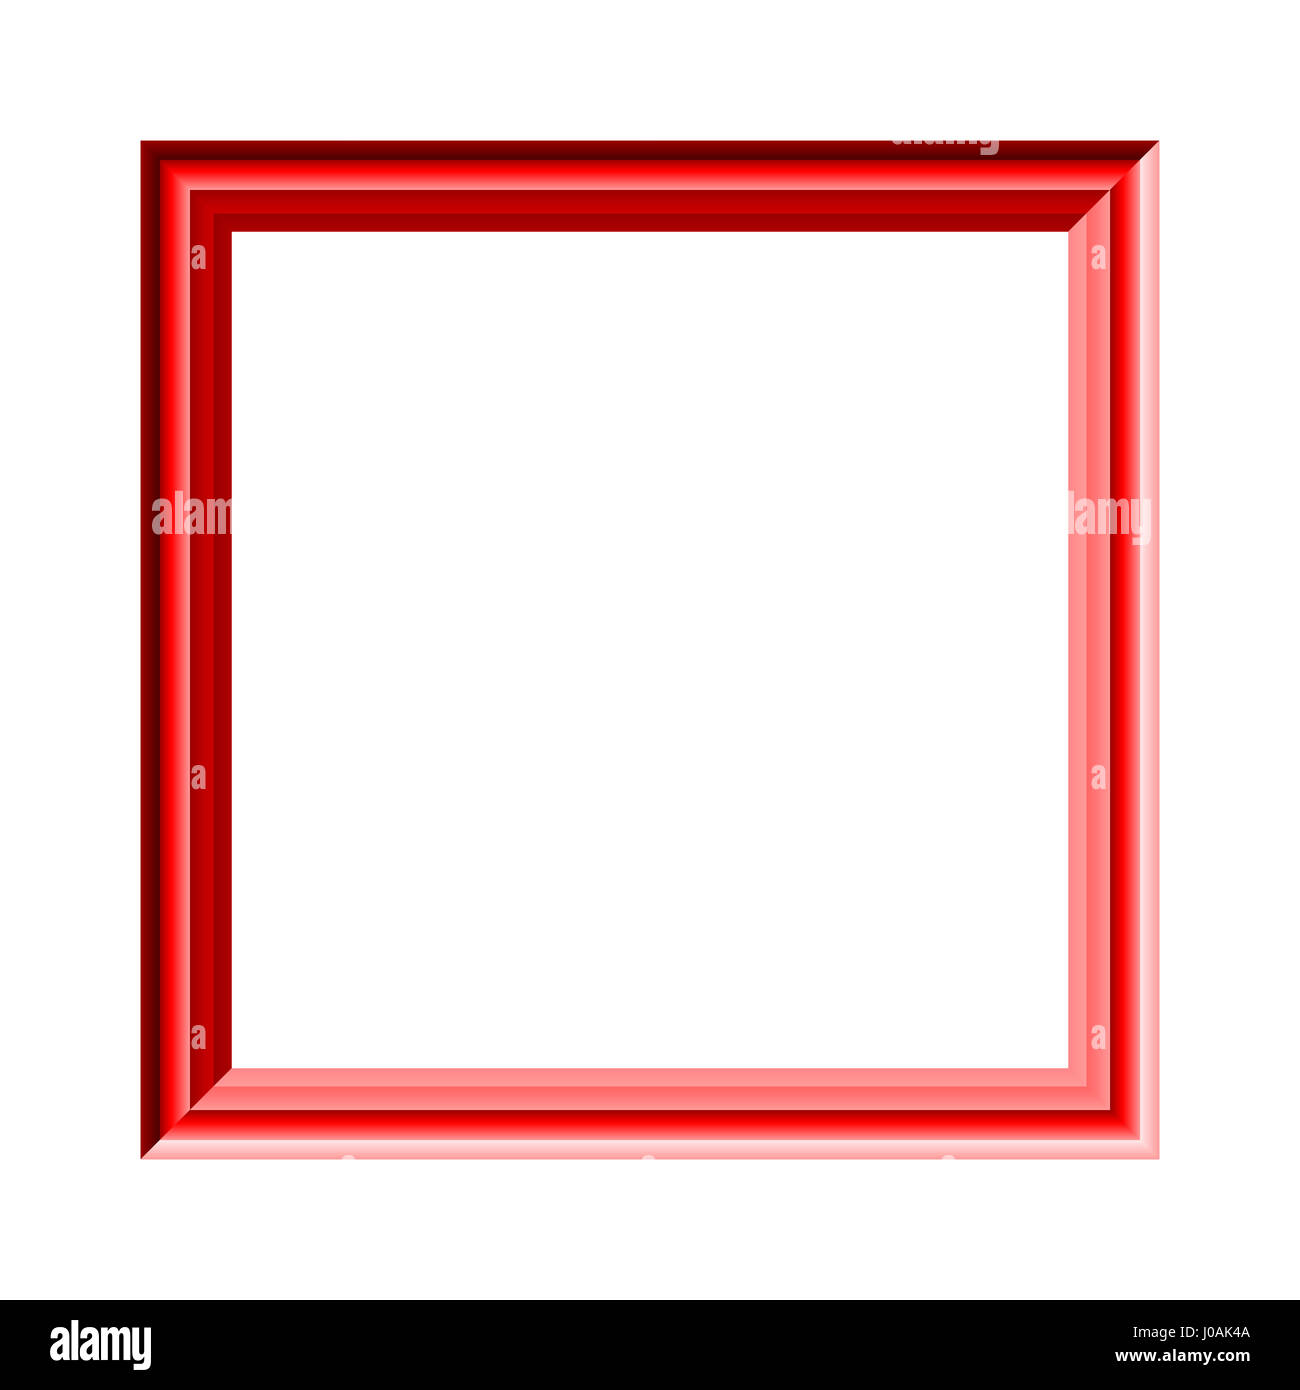 Photo frame of Red color vintage isolated on white background for design. Stock Photo